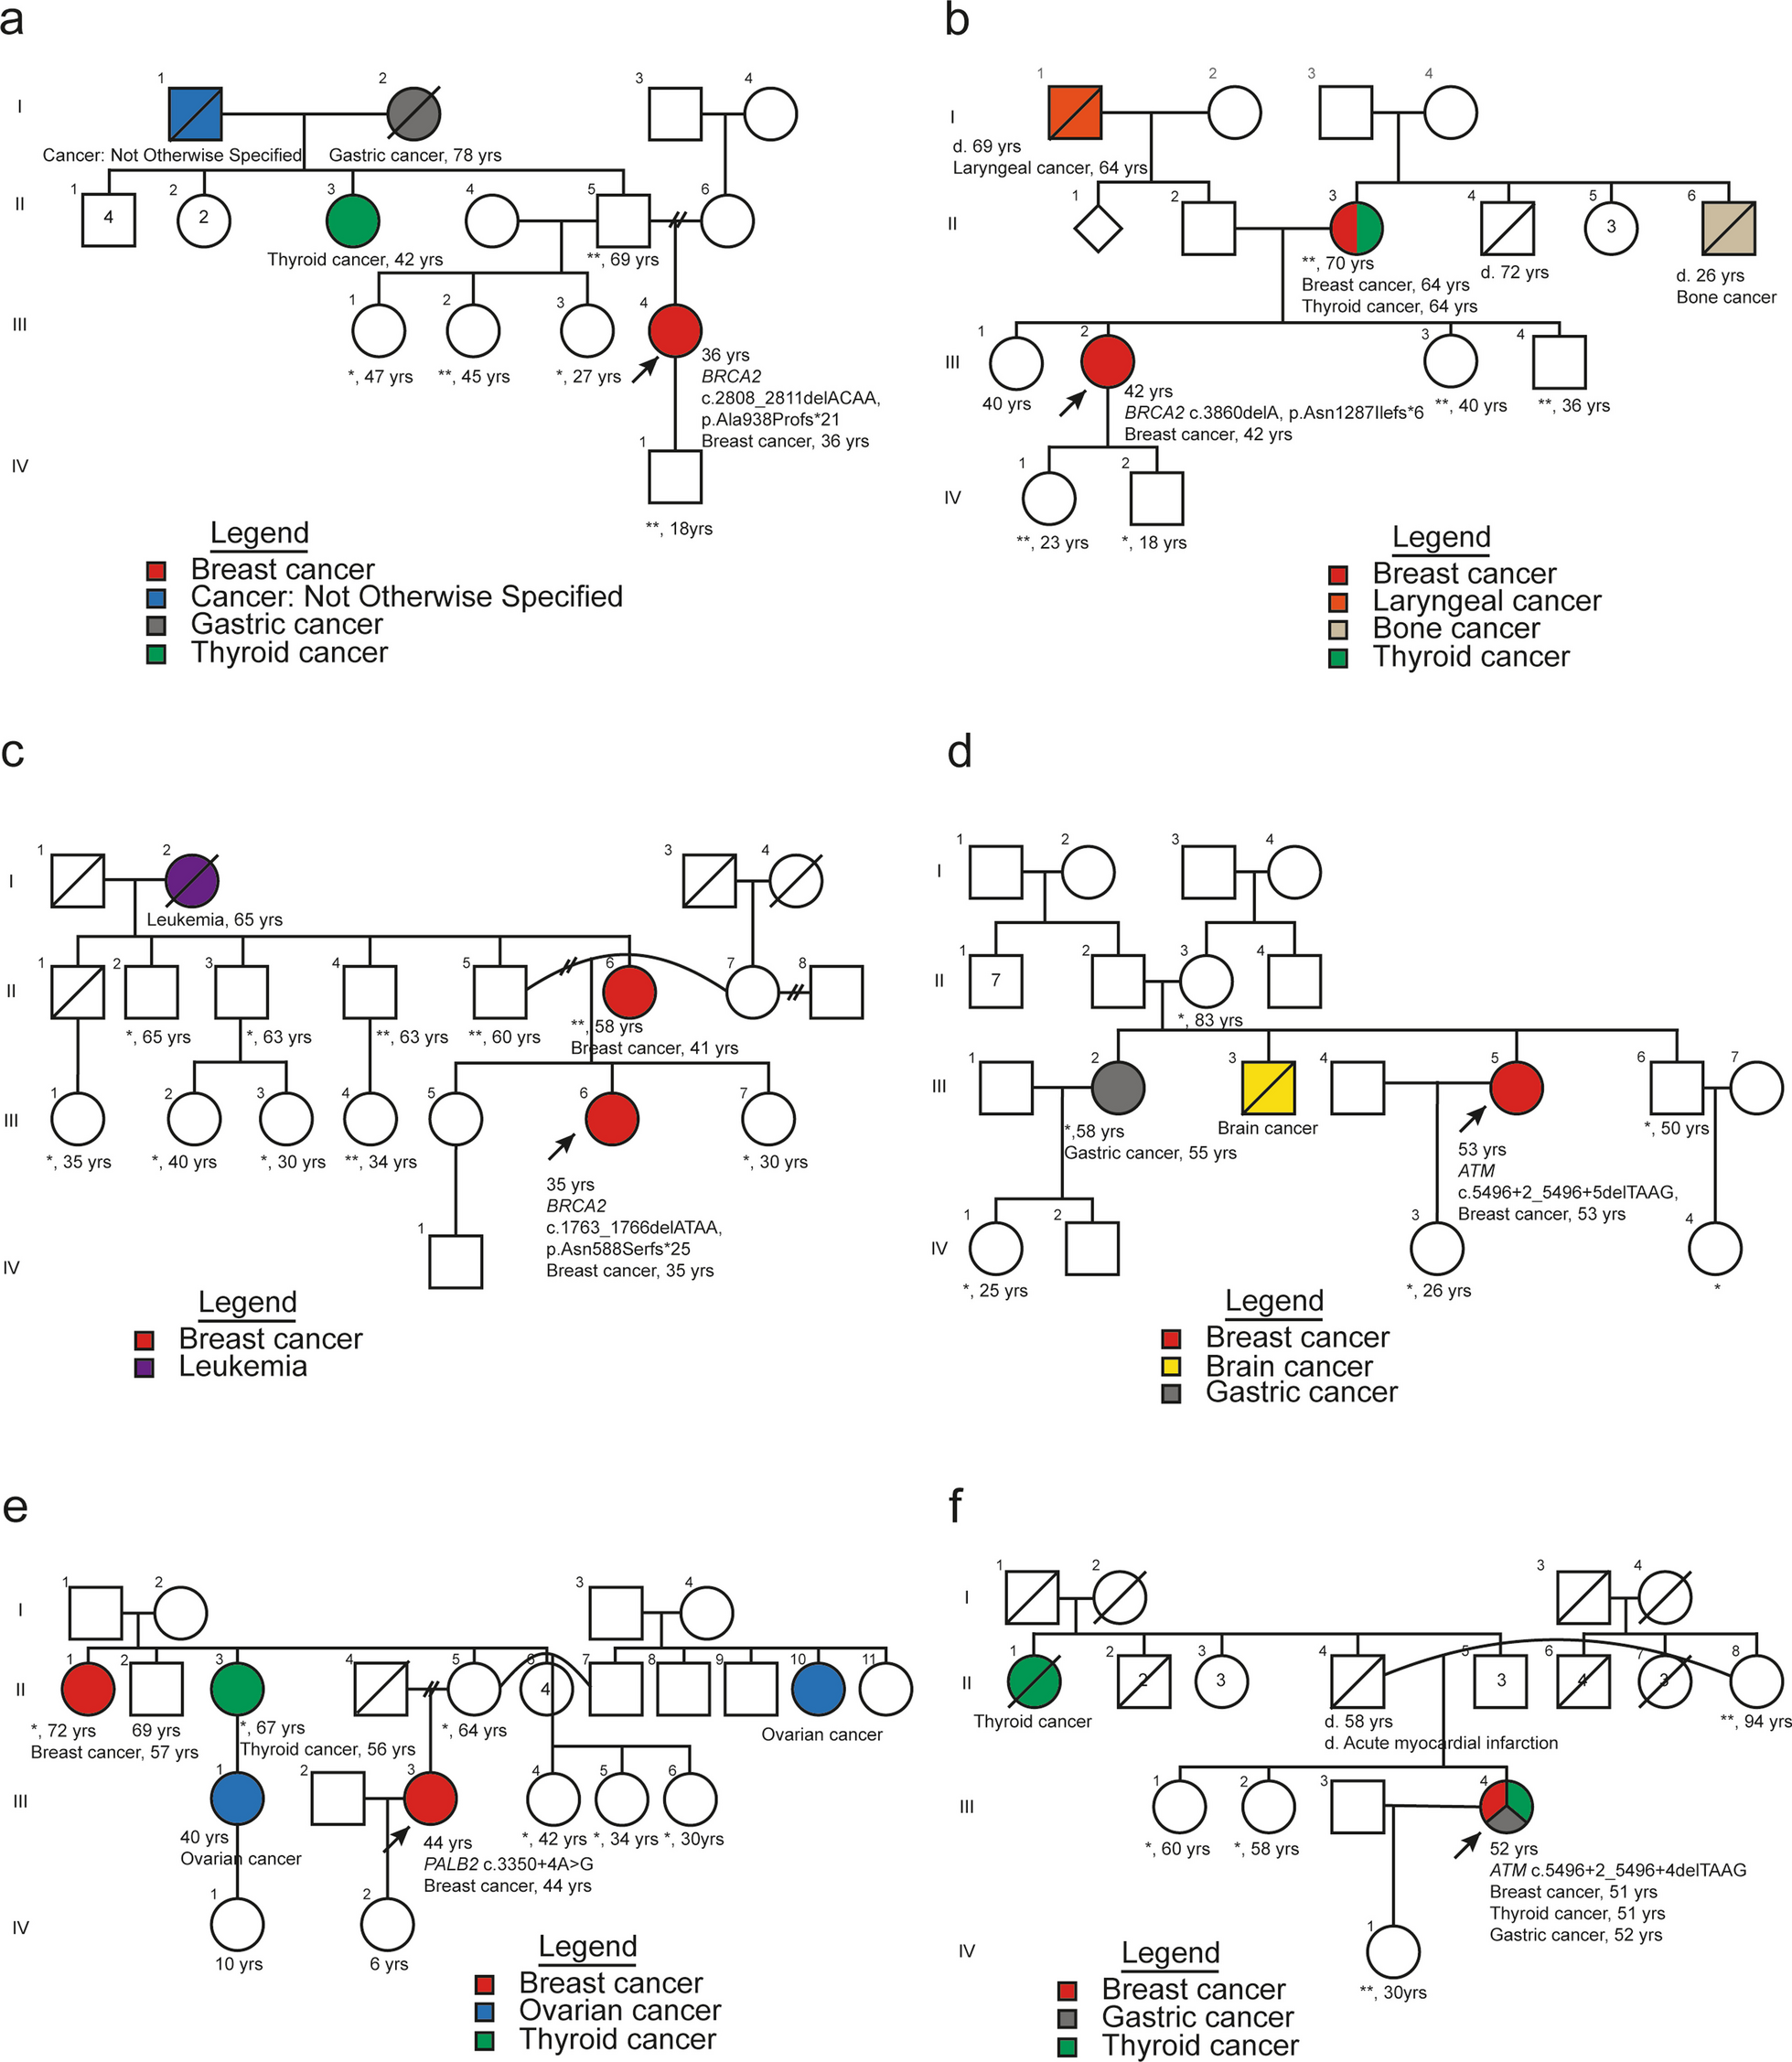 Germline mutations of breast cancer susceptibility genes through expanded genetic analysis in unselected Colombian patients